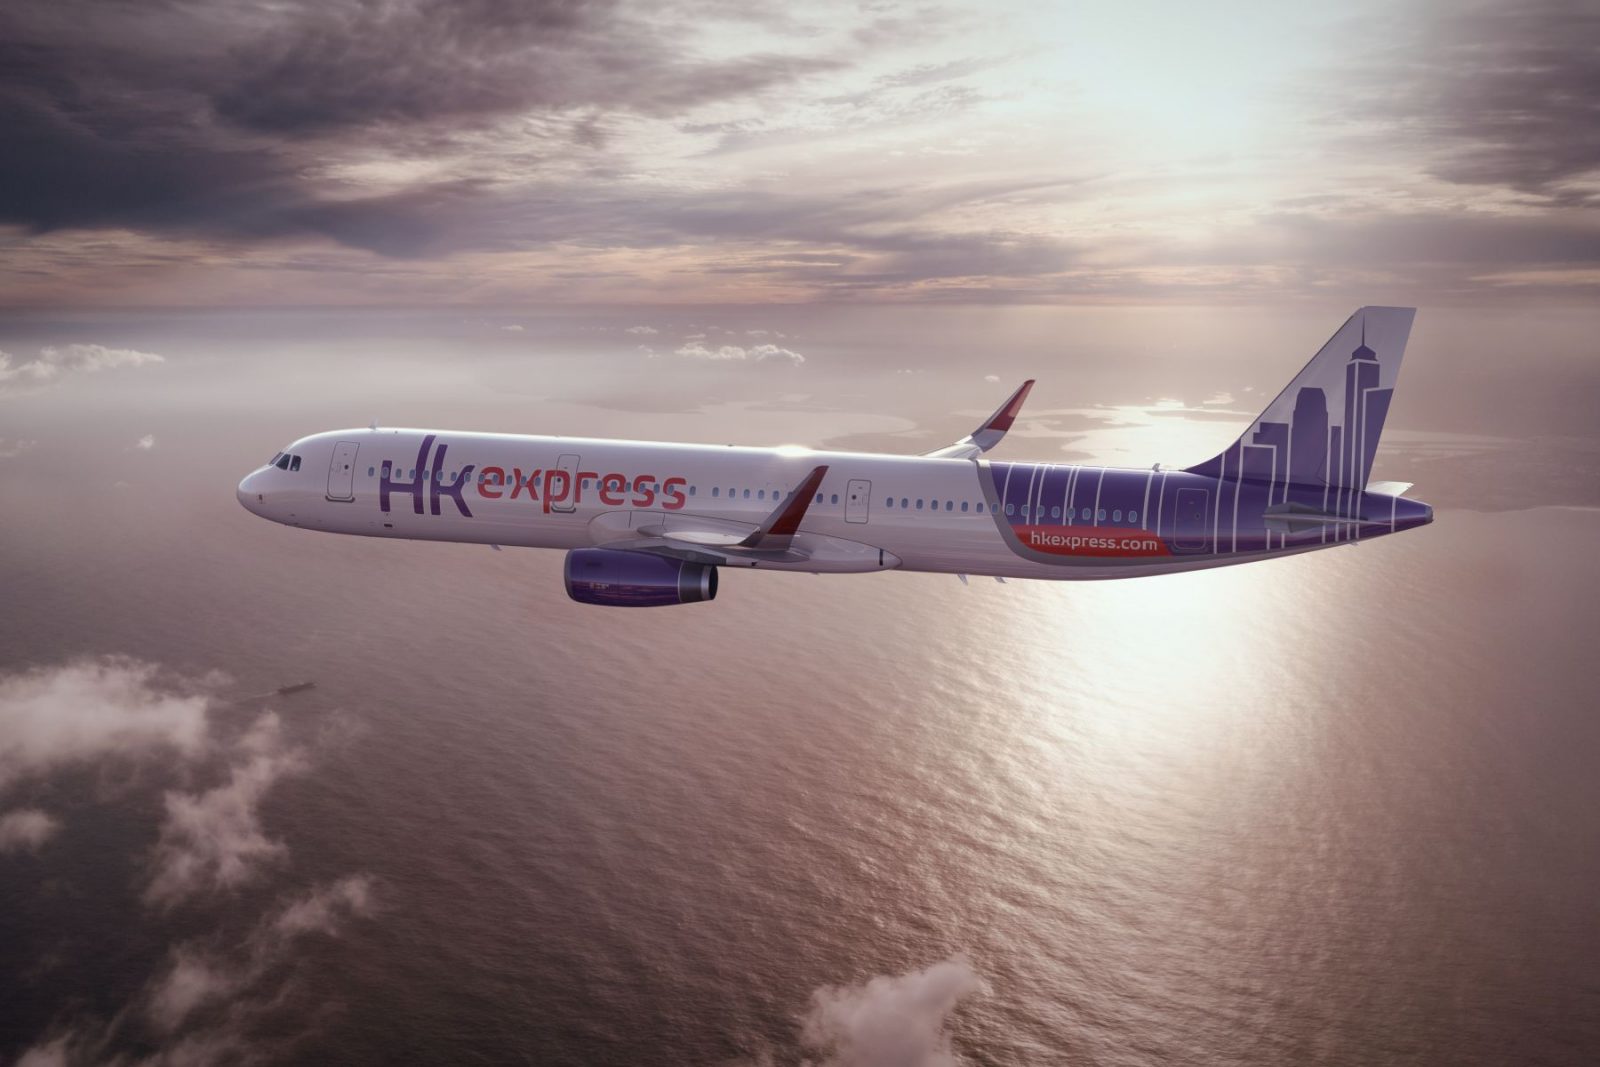 CONFIRMED: Cathay Pacific is Acquiring HK Express From Embattled HNA Group for $628 Million